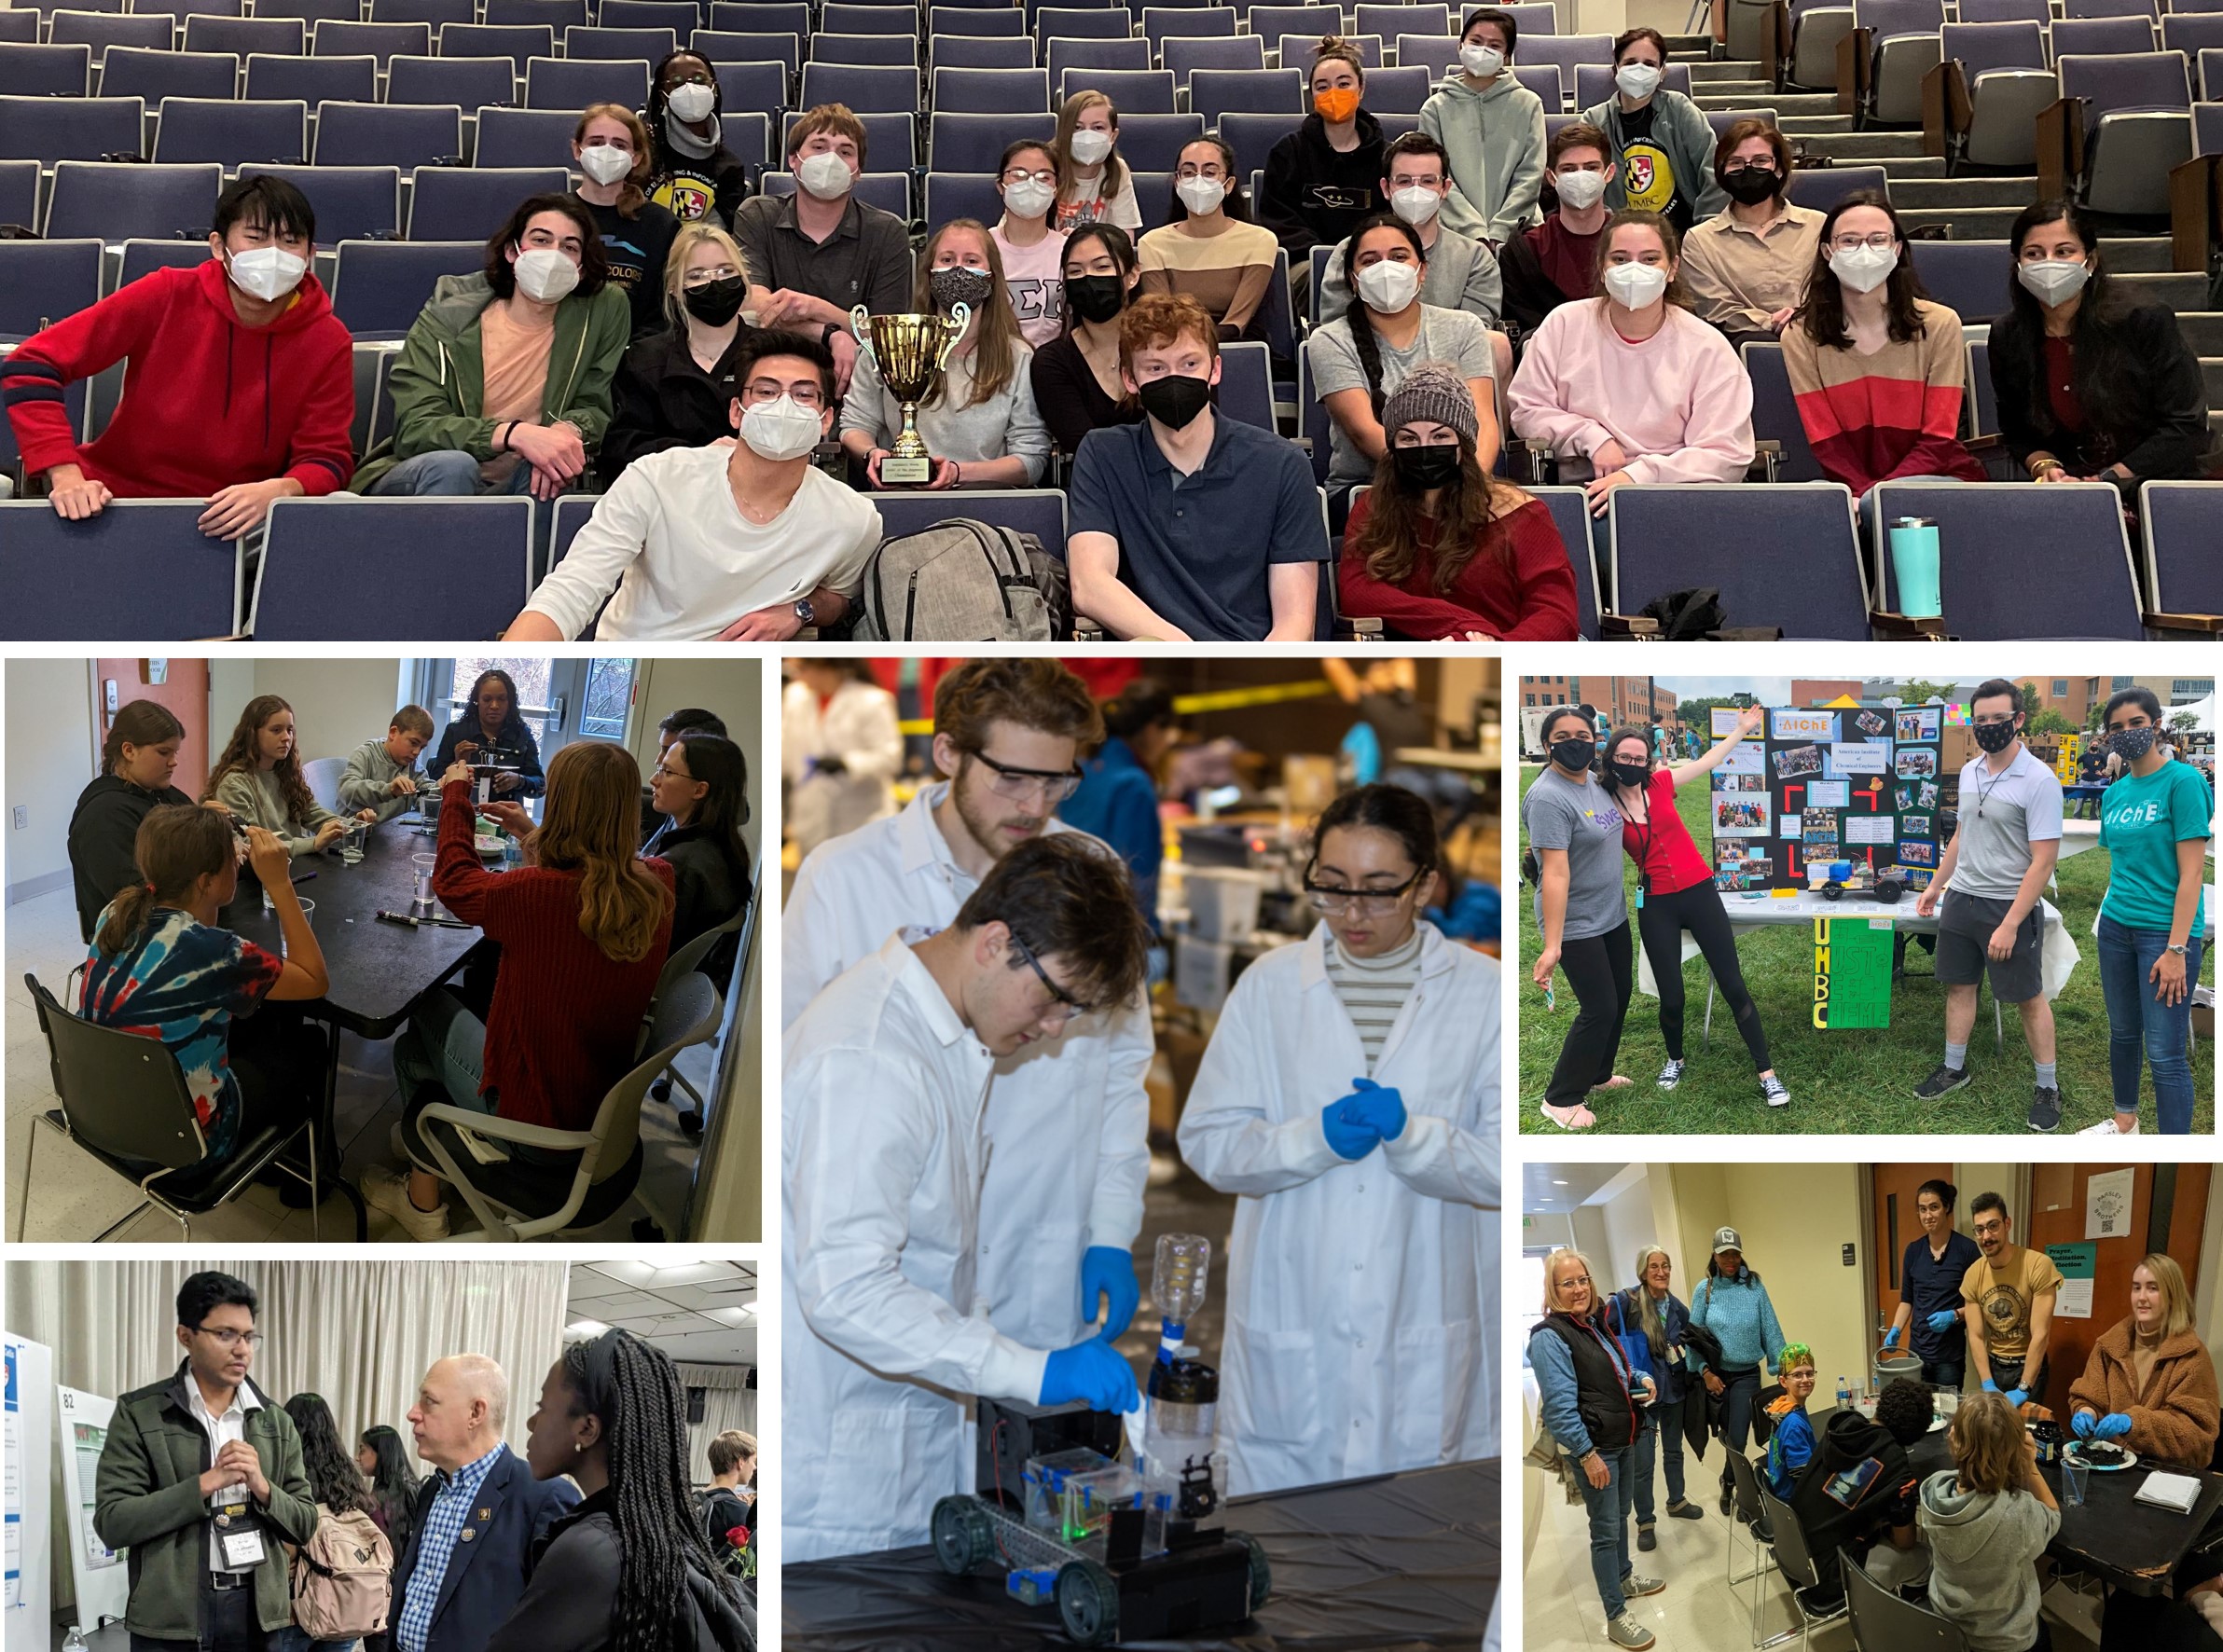 Photos of UMBC AIChE student members participating in various organization activities